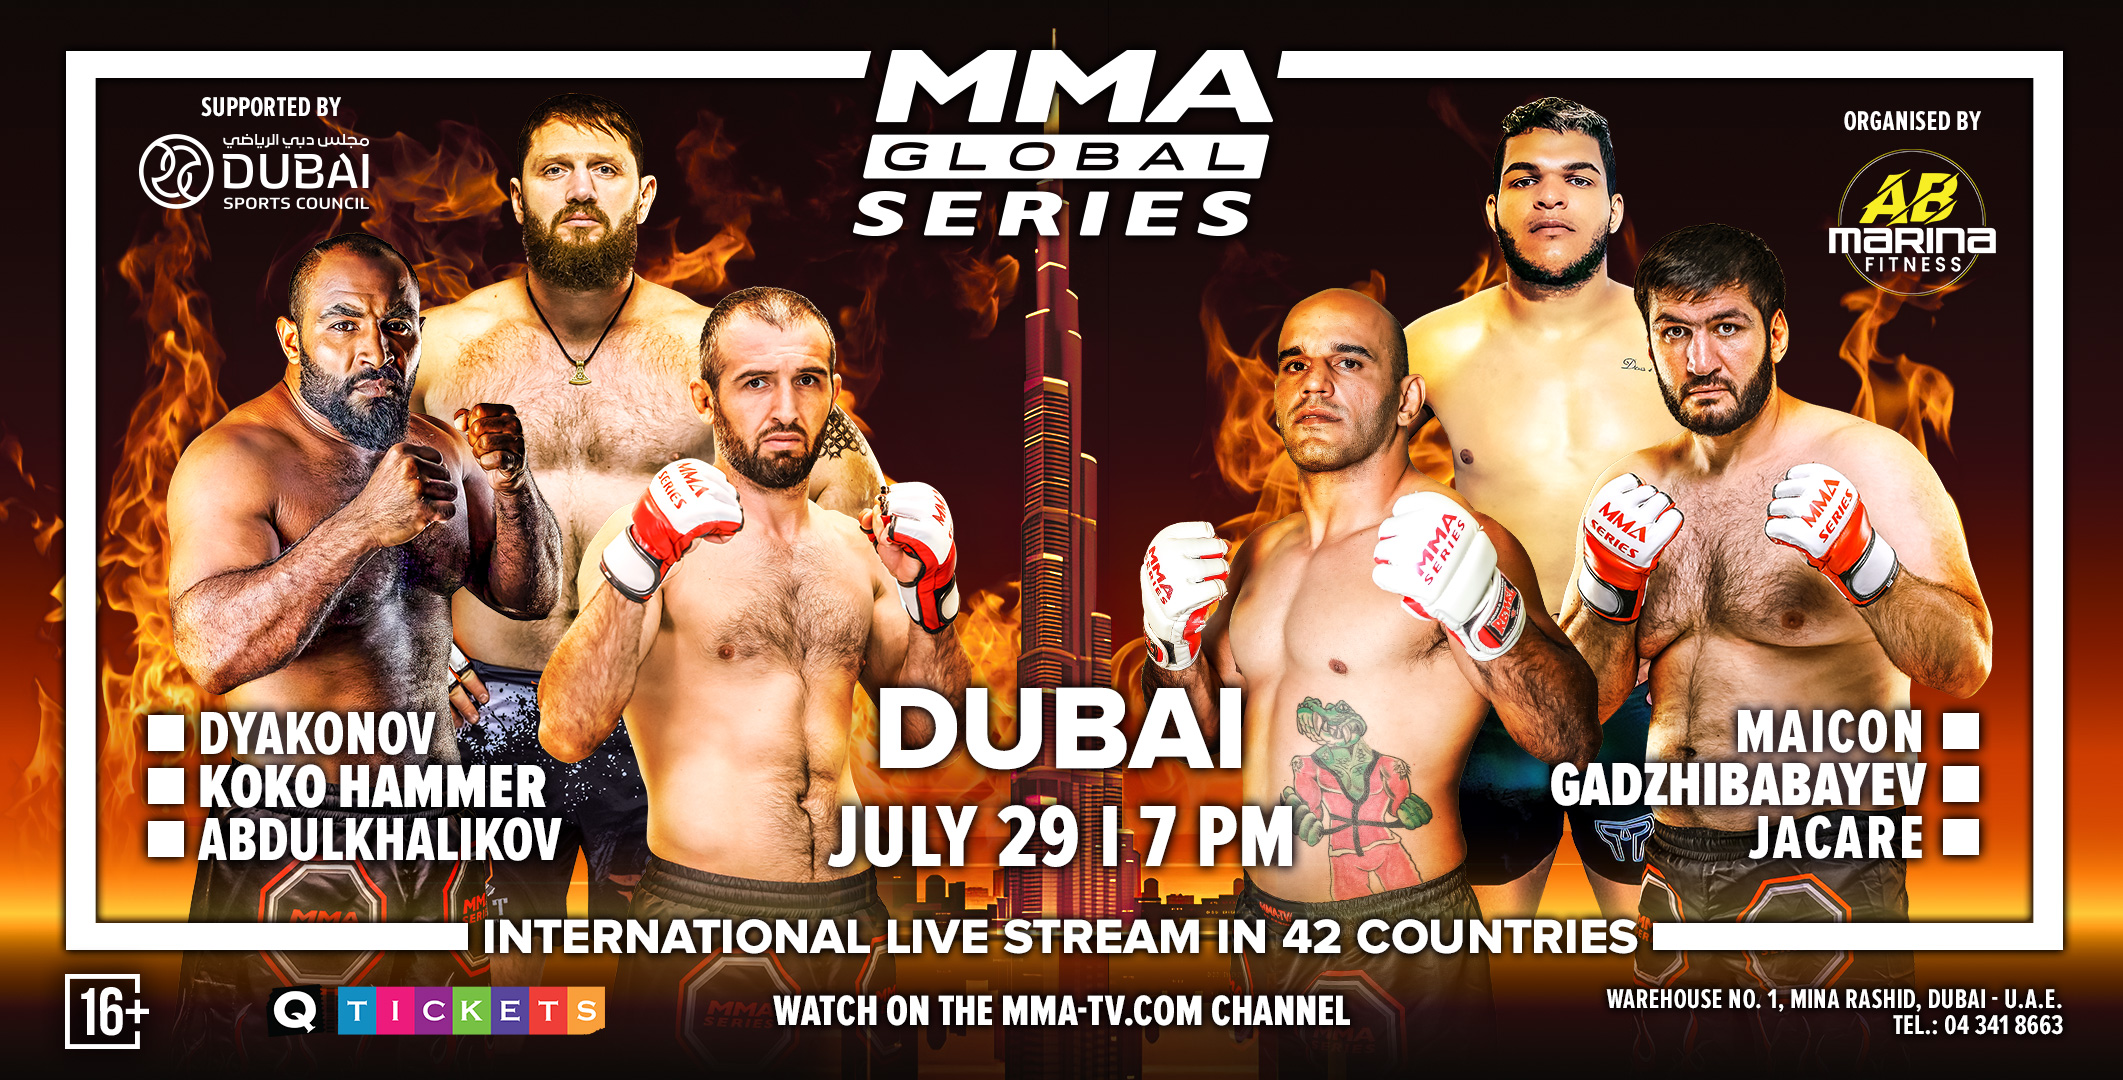 THE FIRST MMA GLOBAL SERIES EVENT WILL BE HOT IN DUBAI MMA Series official website